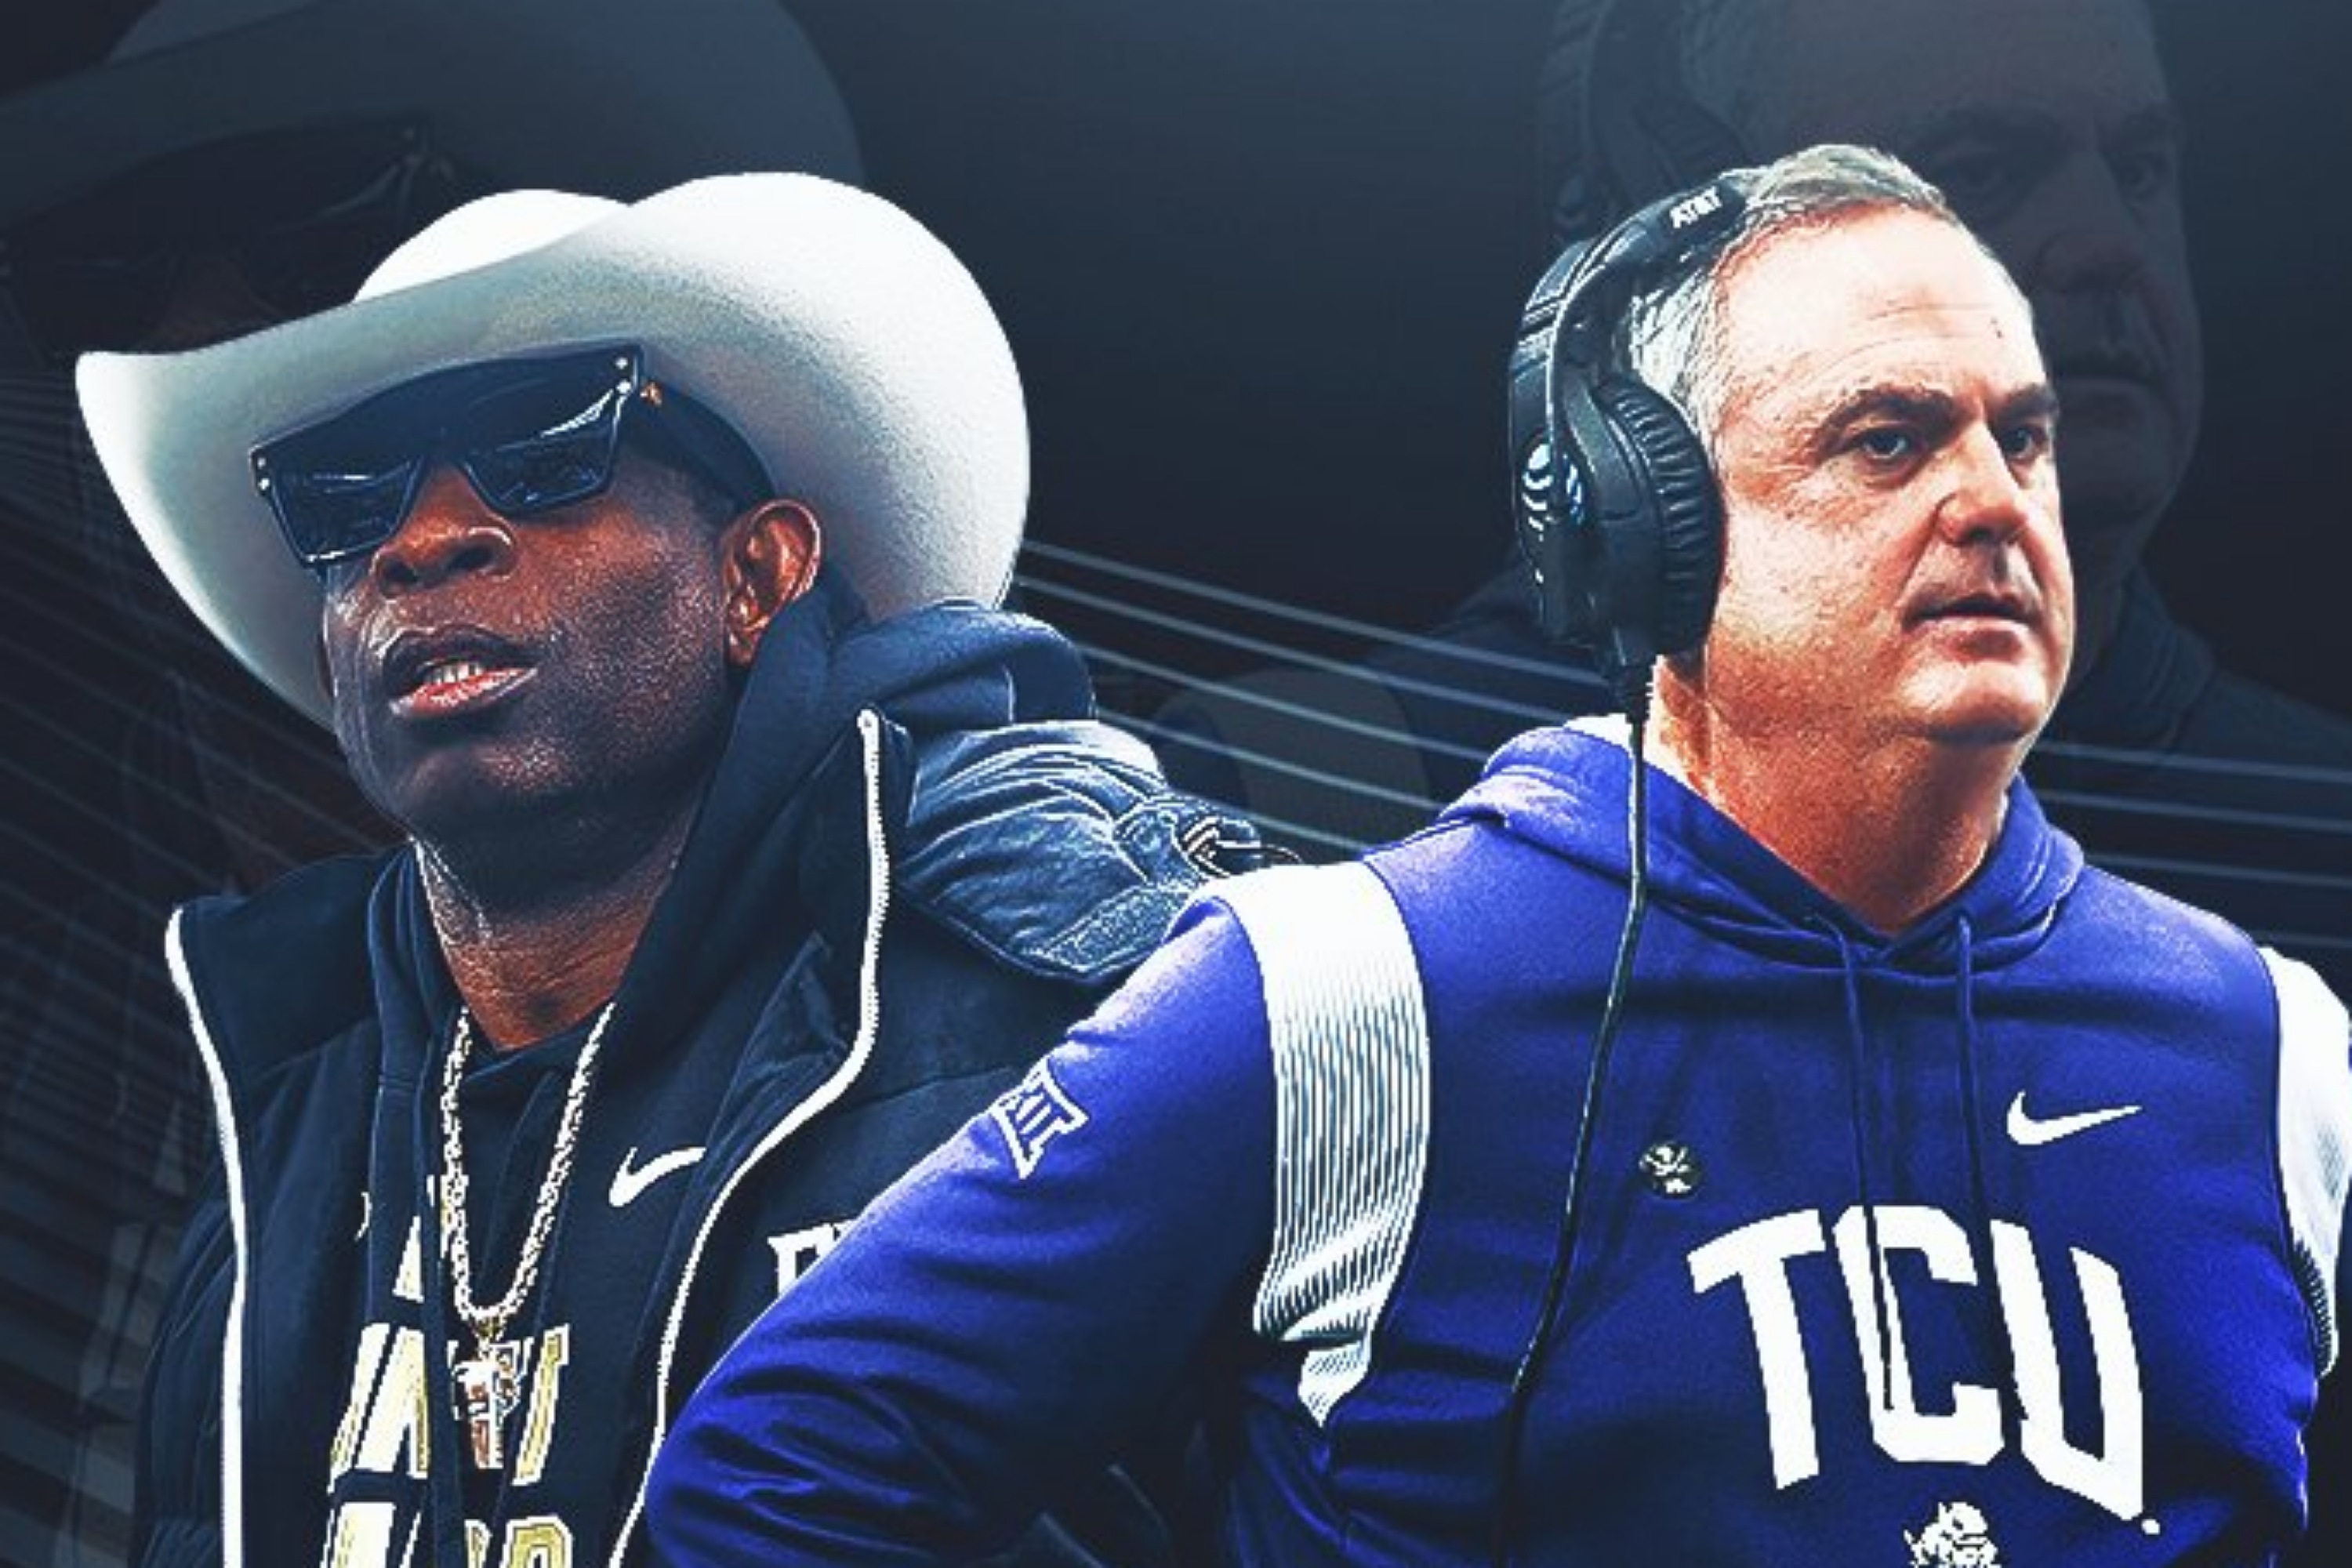 Colorado's Deion Sanders and TCU's Sonny Dykes graphic by FOX Sports